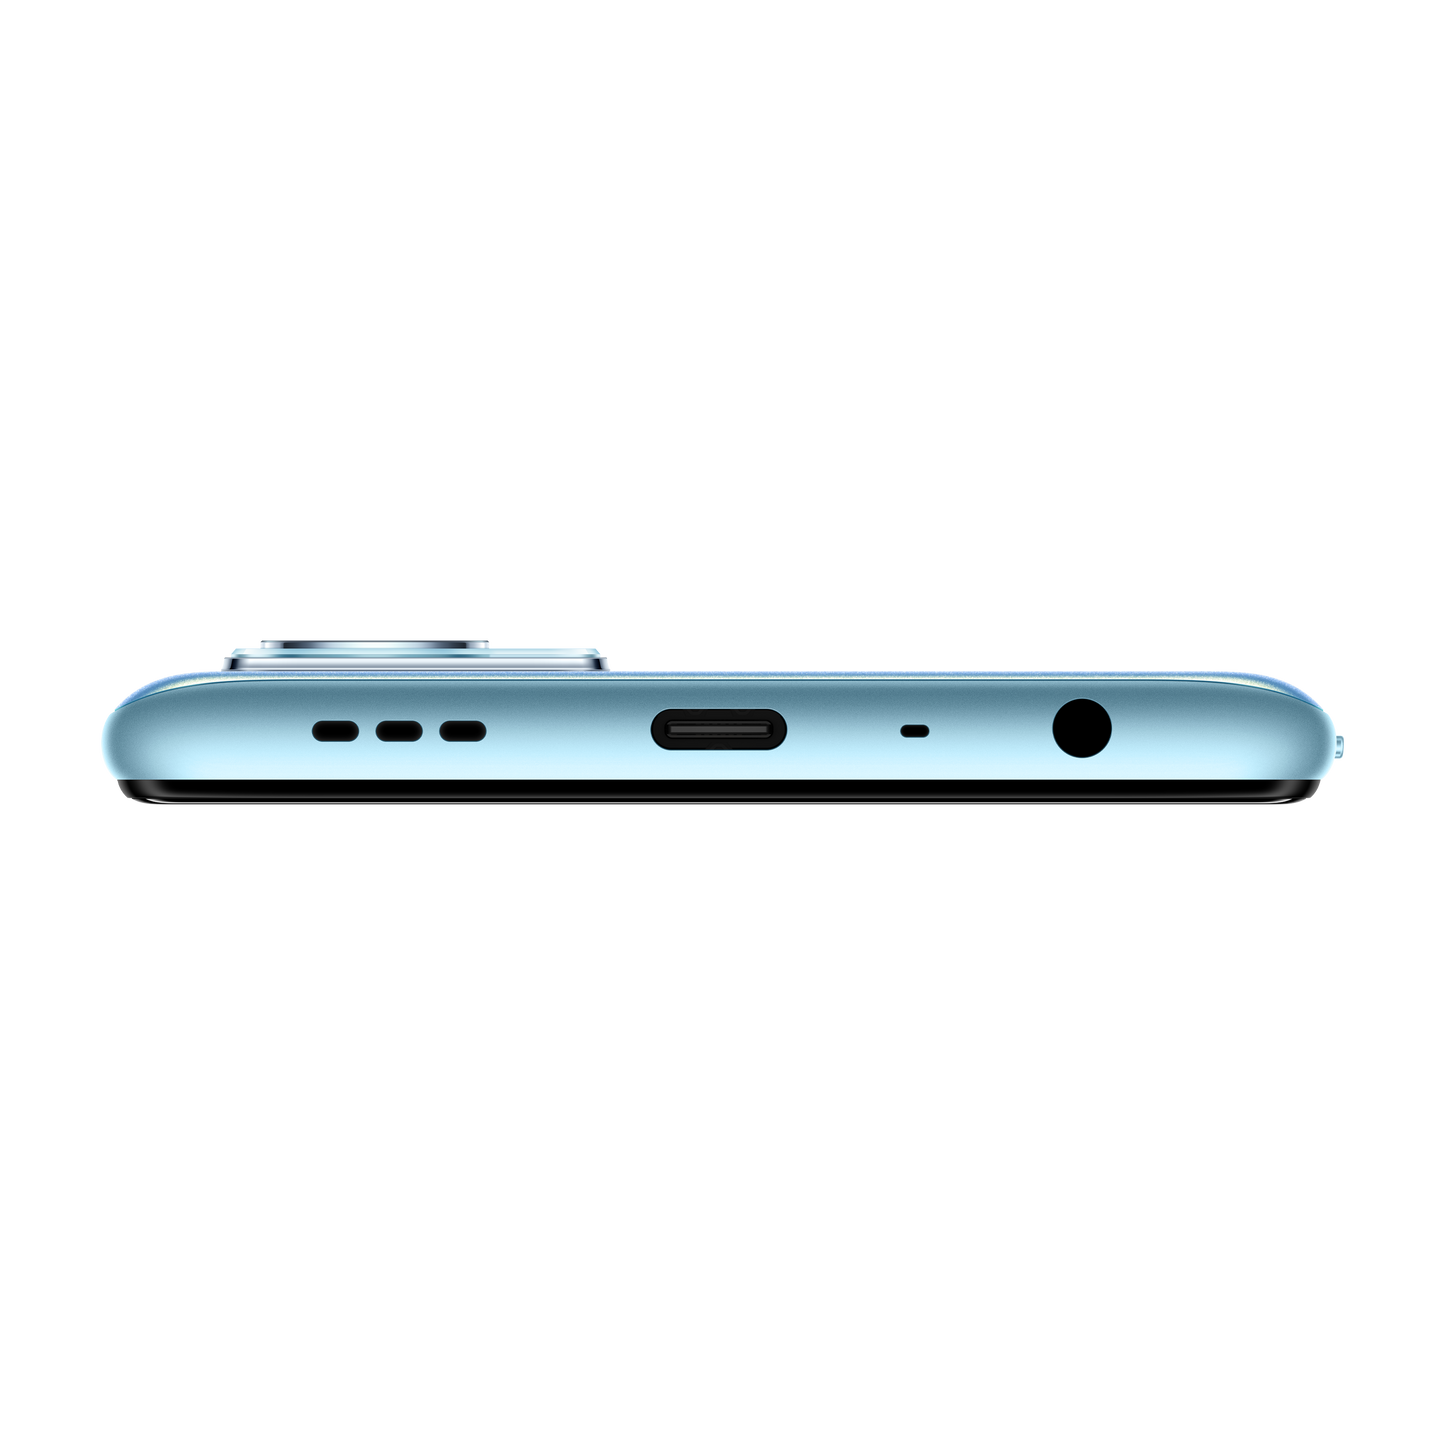 OPPO A96 - Refurbished